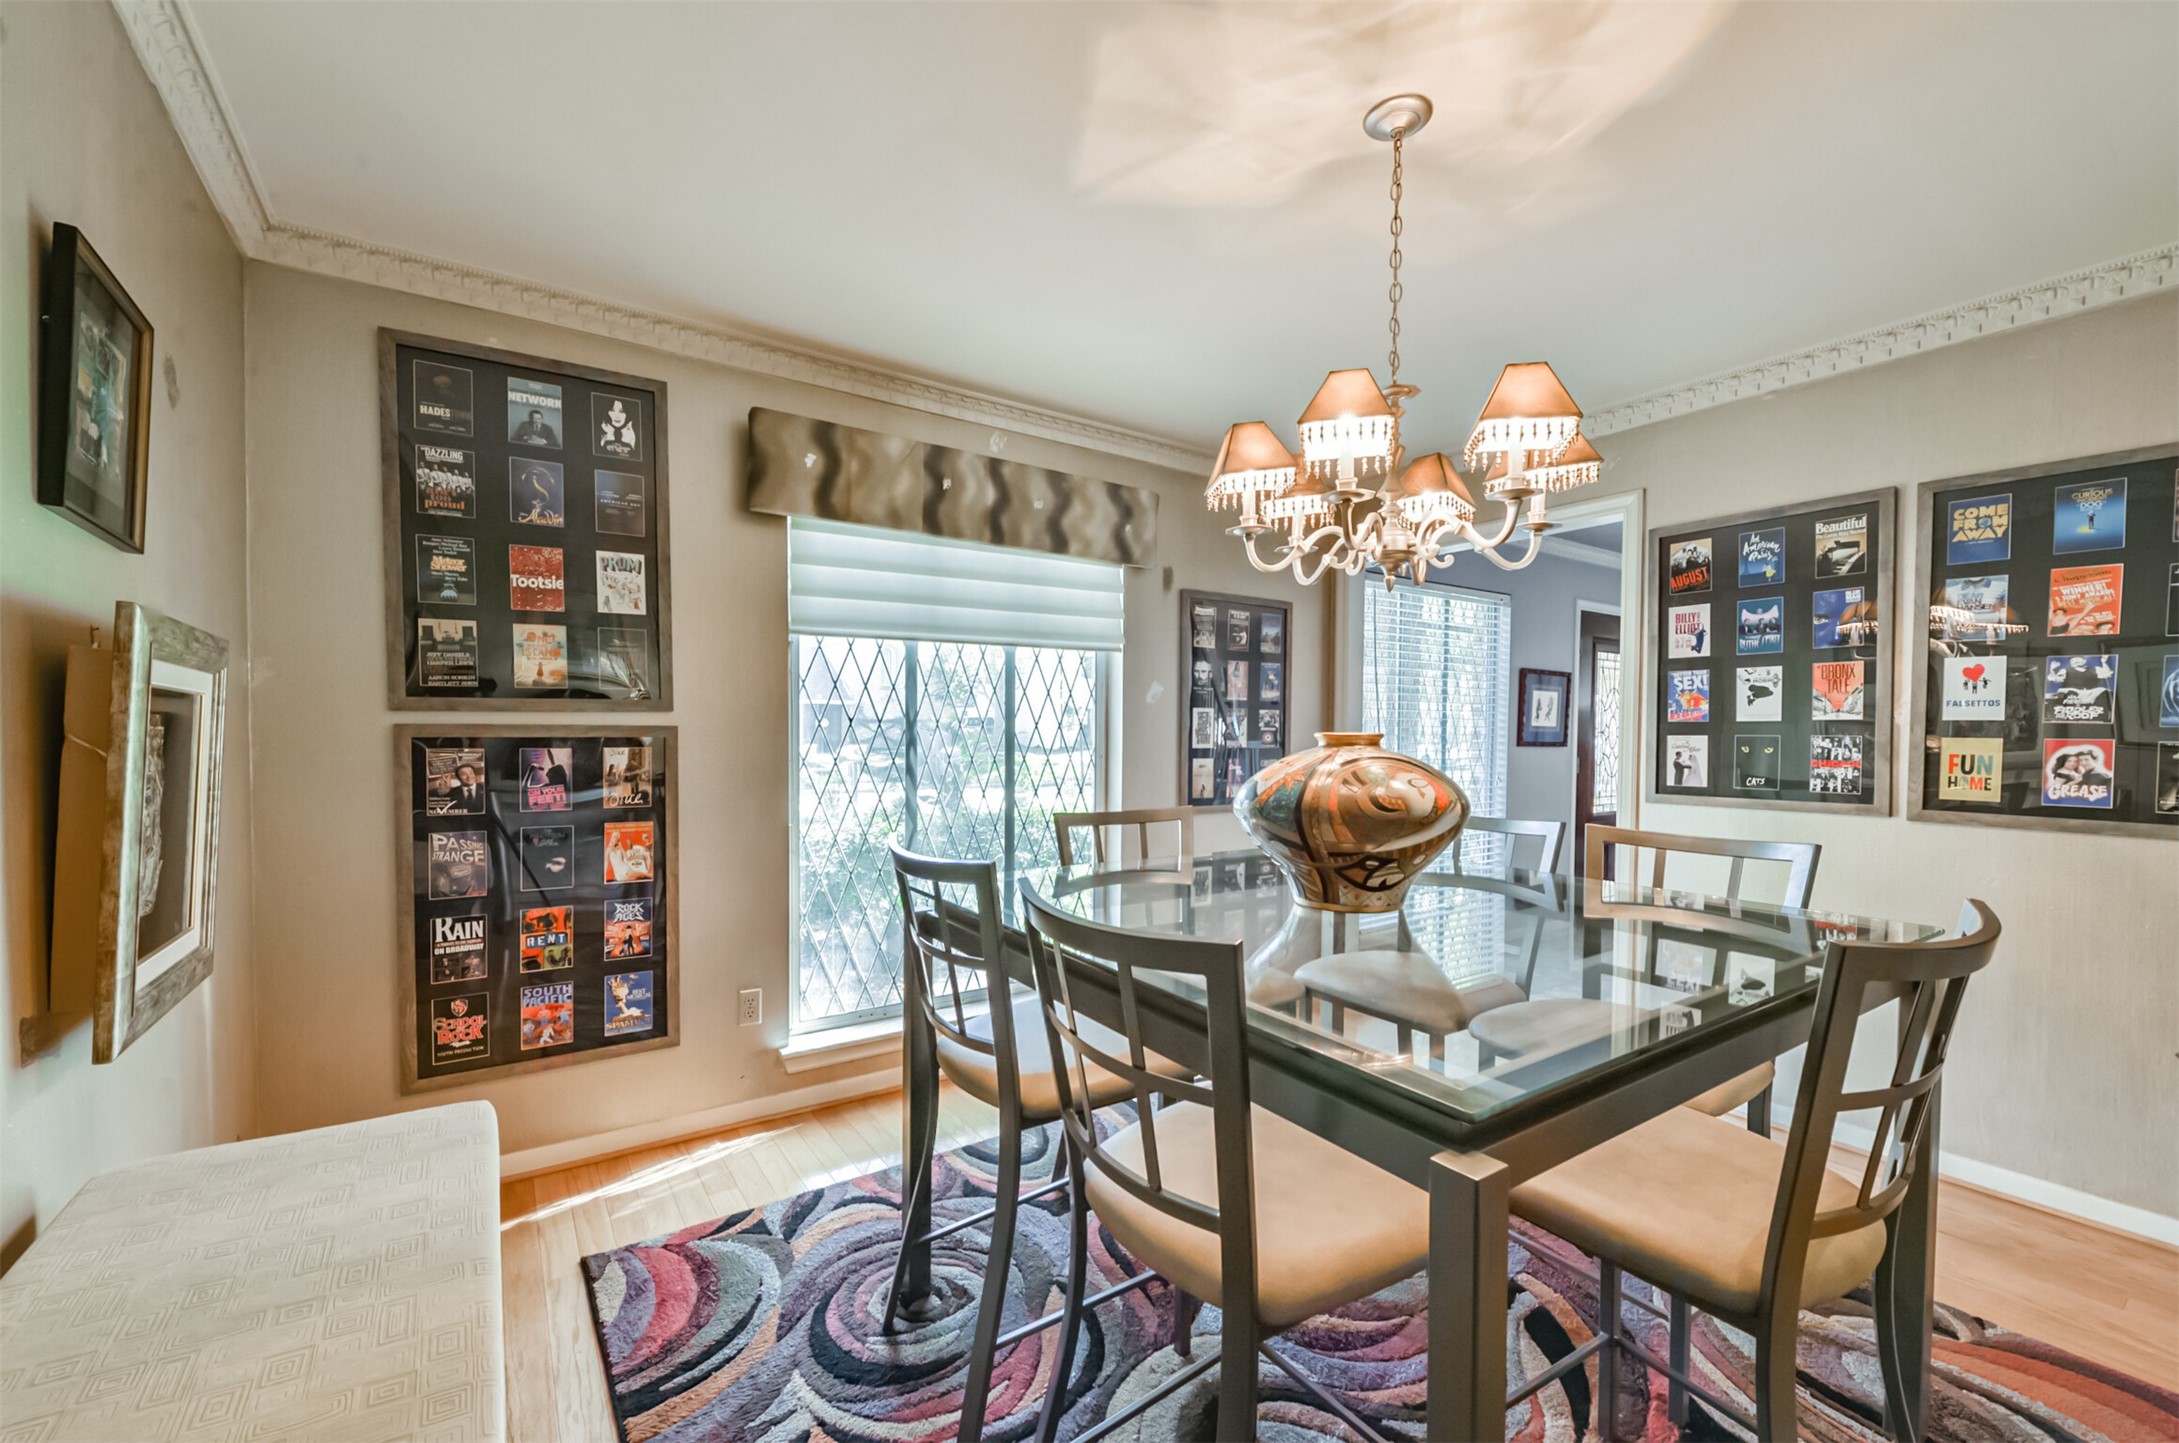 Custom paint and framed Playbills line the walls and are an instant conversation starter for dinner guests. The diamond shaped leaded glass windows look out over the front yard.